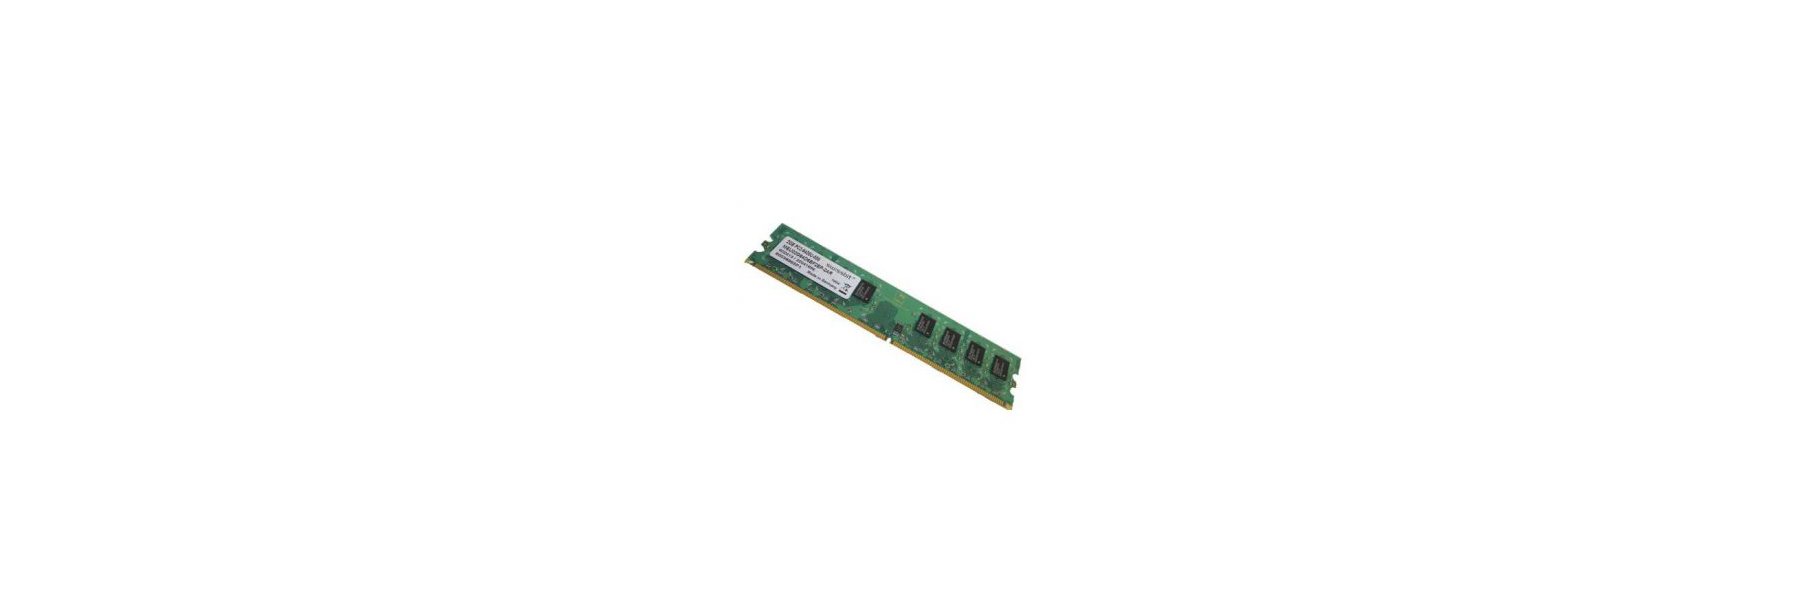 PC3-8500S / SO-DIMM